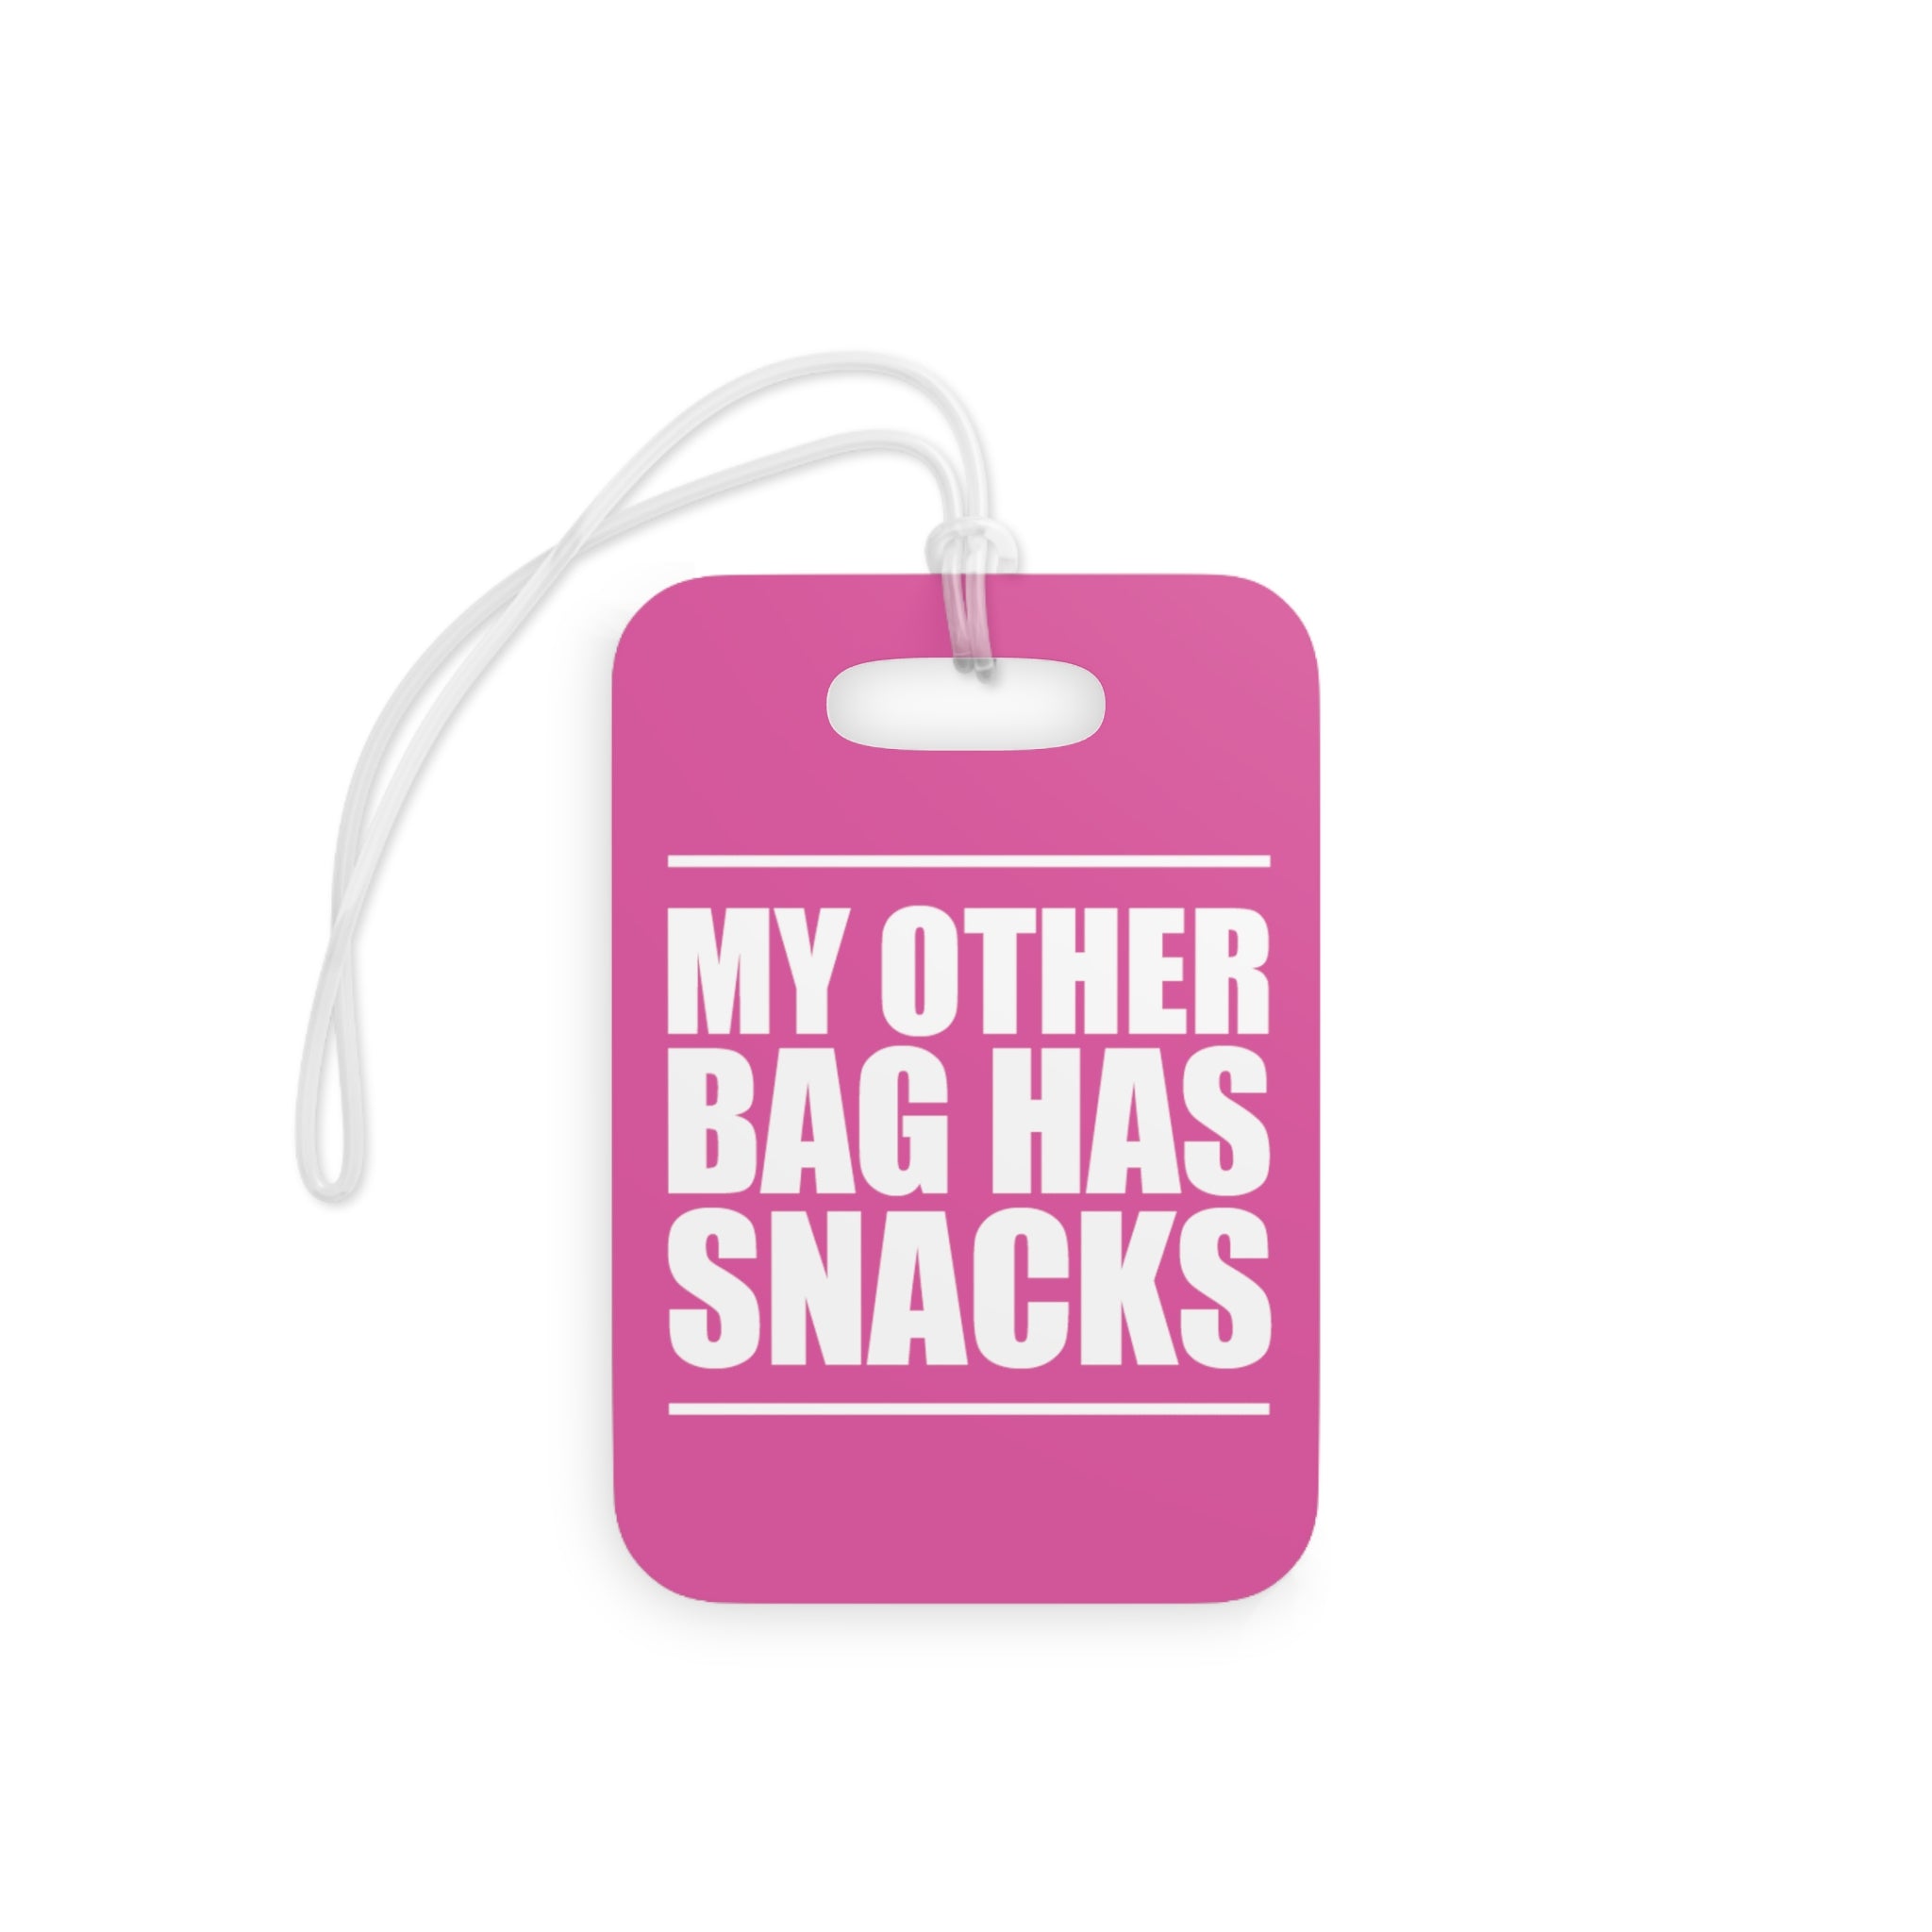 My other bag has snacks Luggage Tag (Pink)